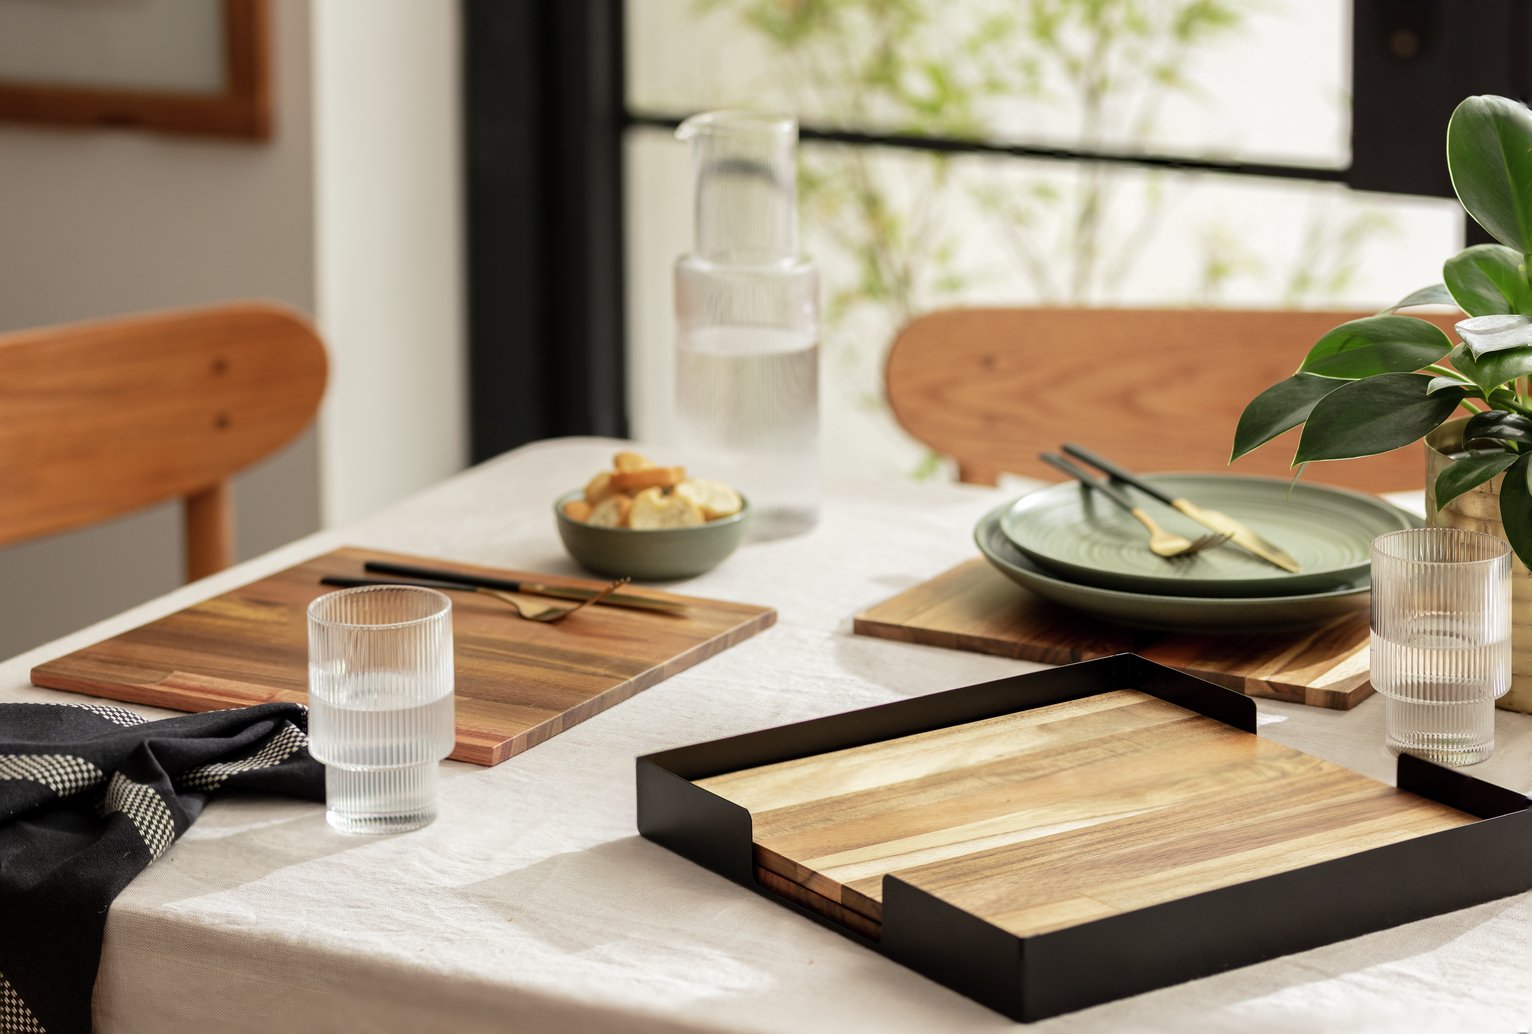 Habitat Set of 4 Wooden Placemats with Tray